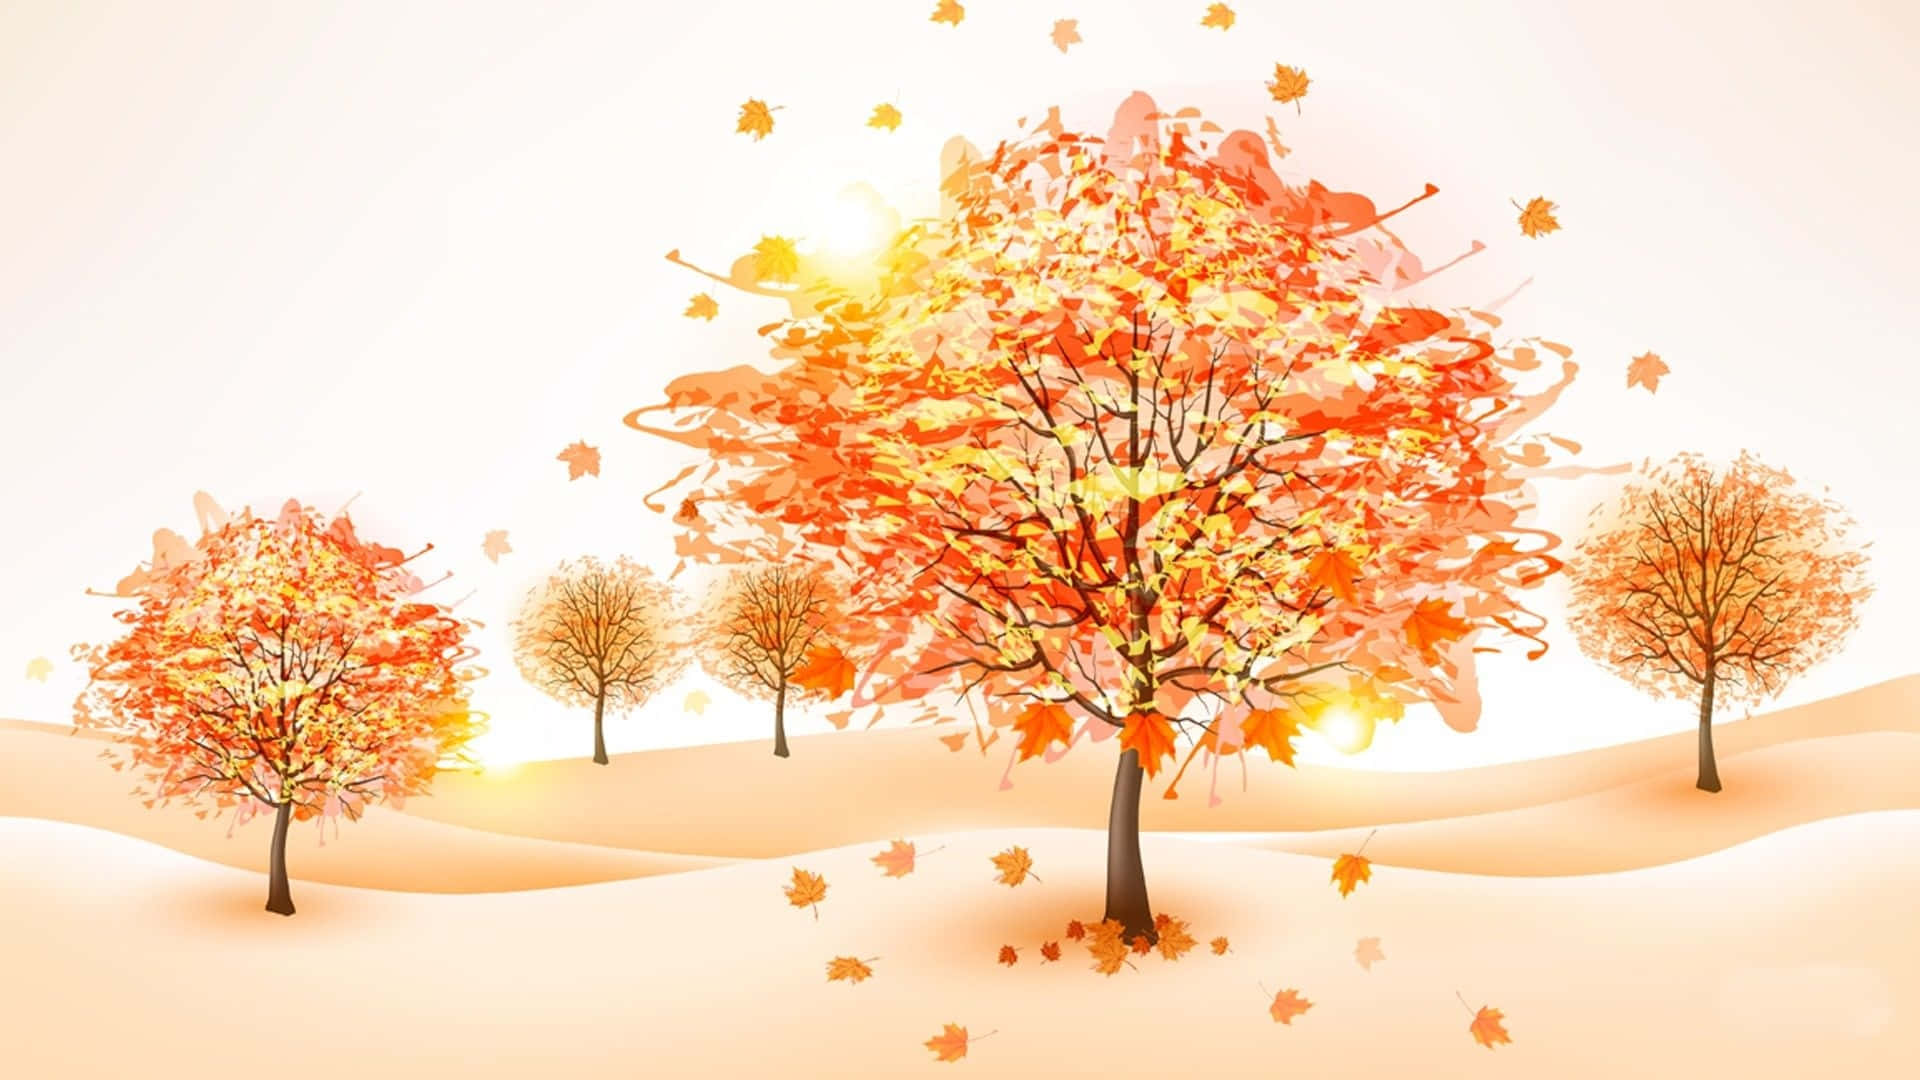 Embrace The Beauty Of Fall With This Cute Autumn Desktop Background Wallpaper